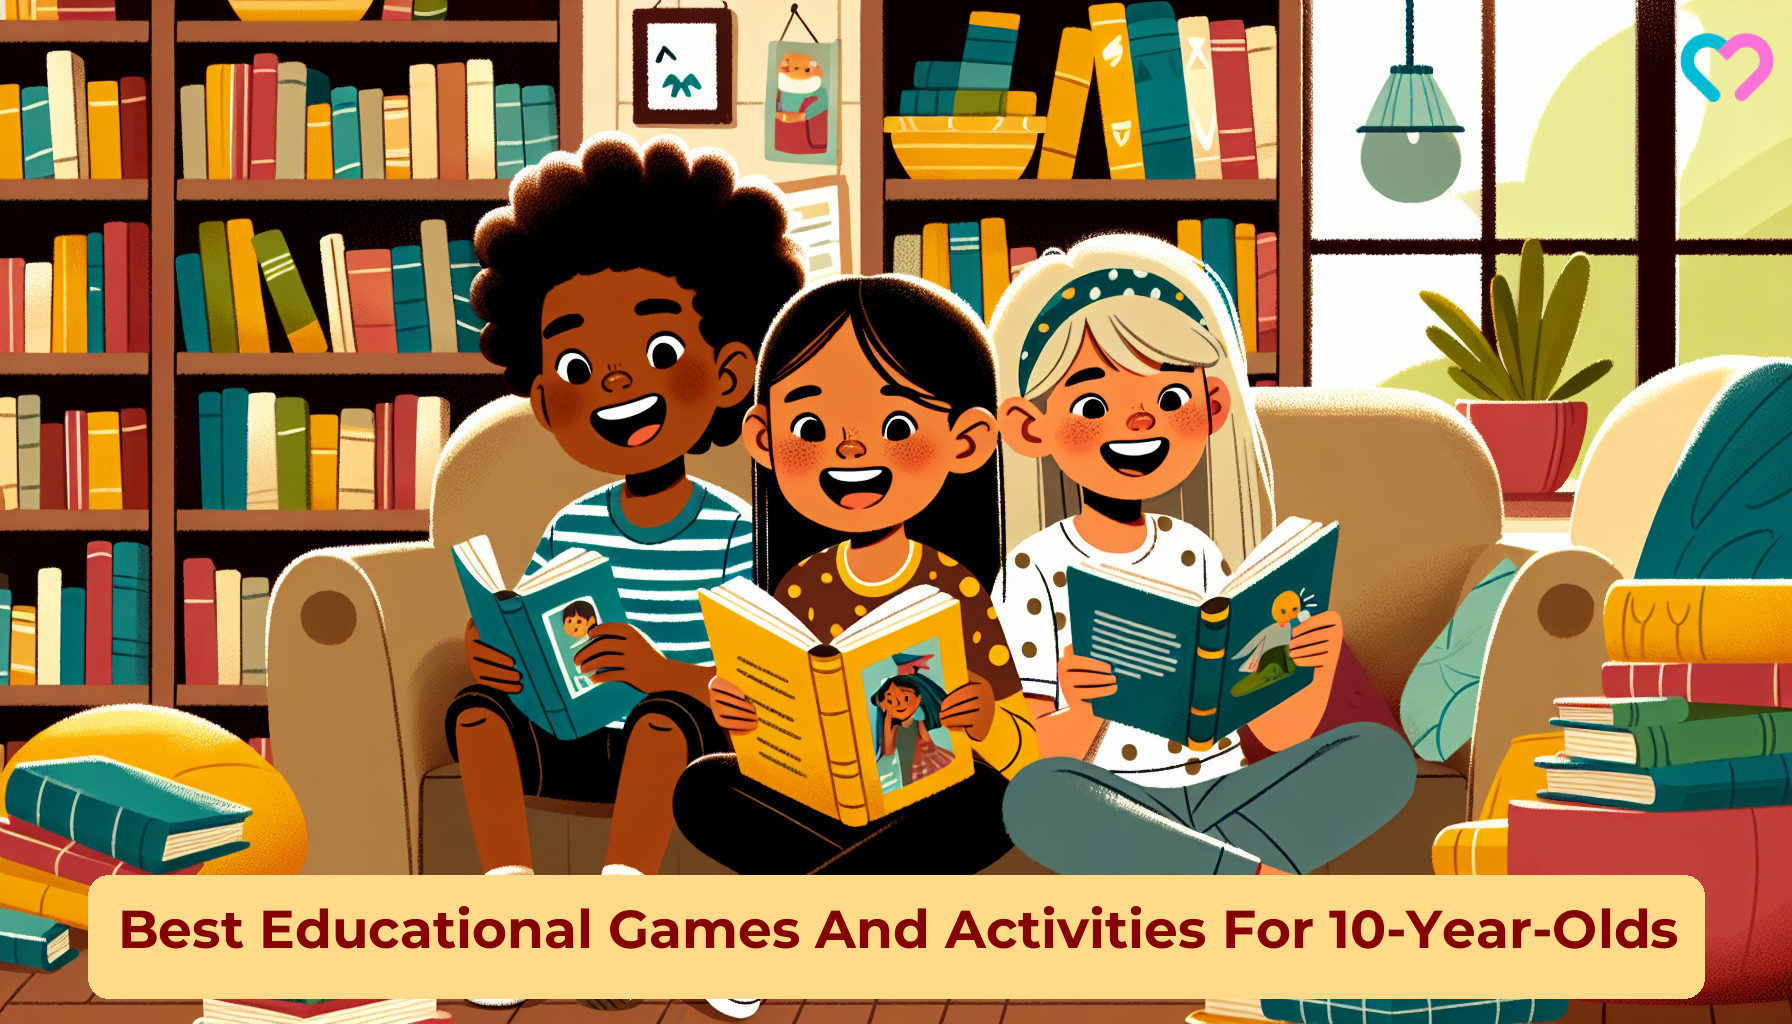 Activities For 10-Year-Olds_illustration